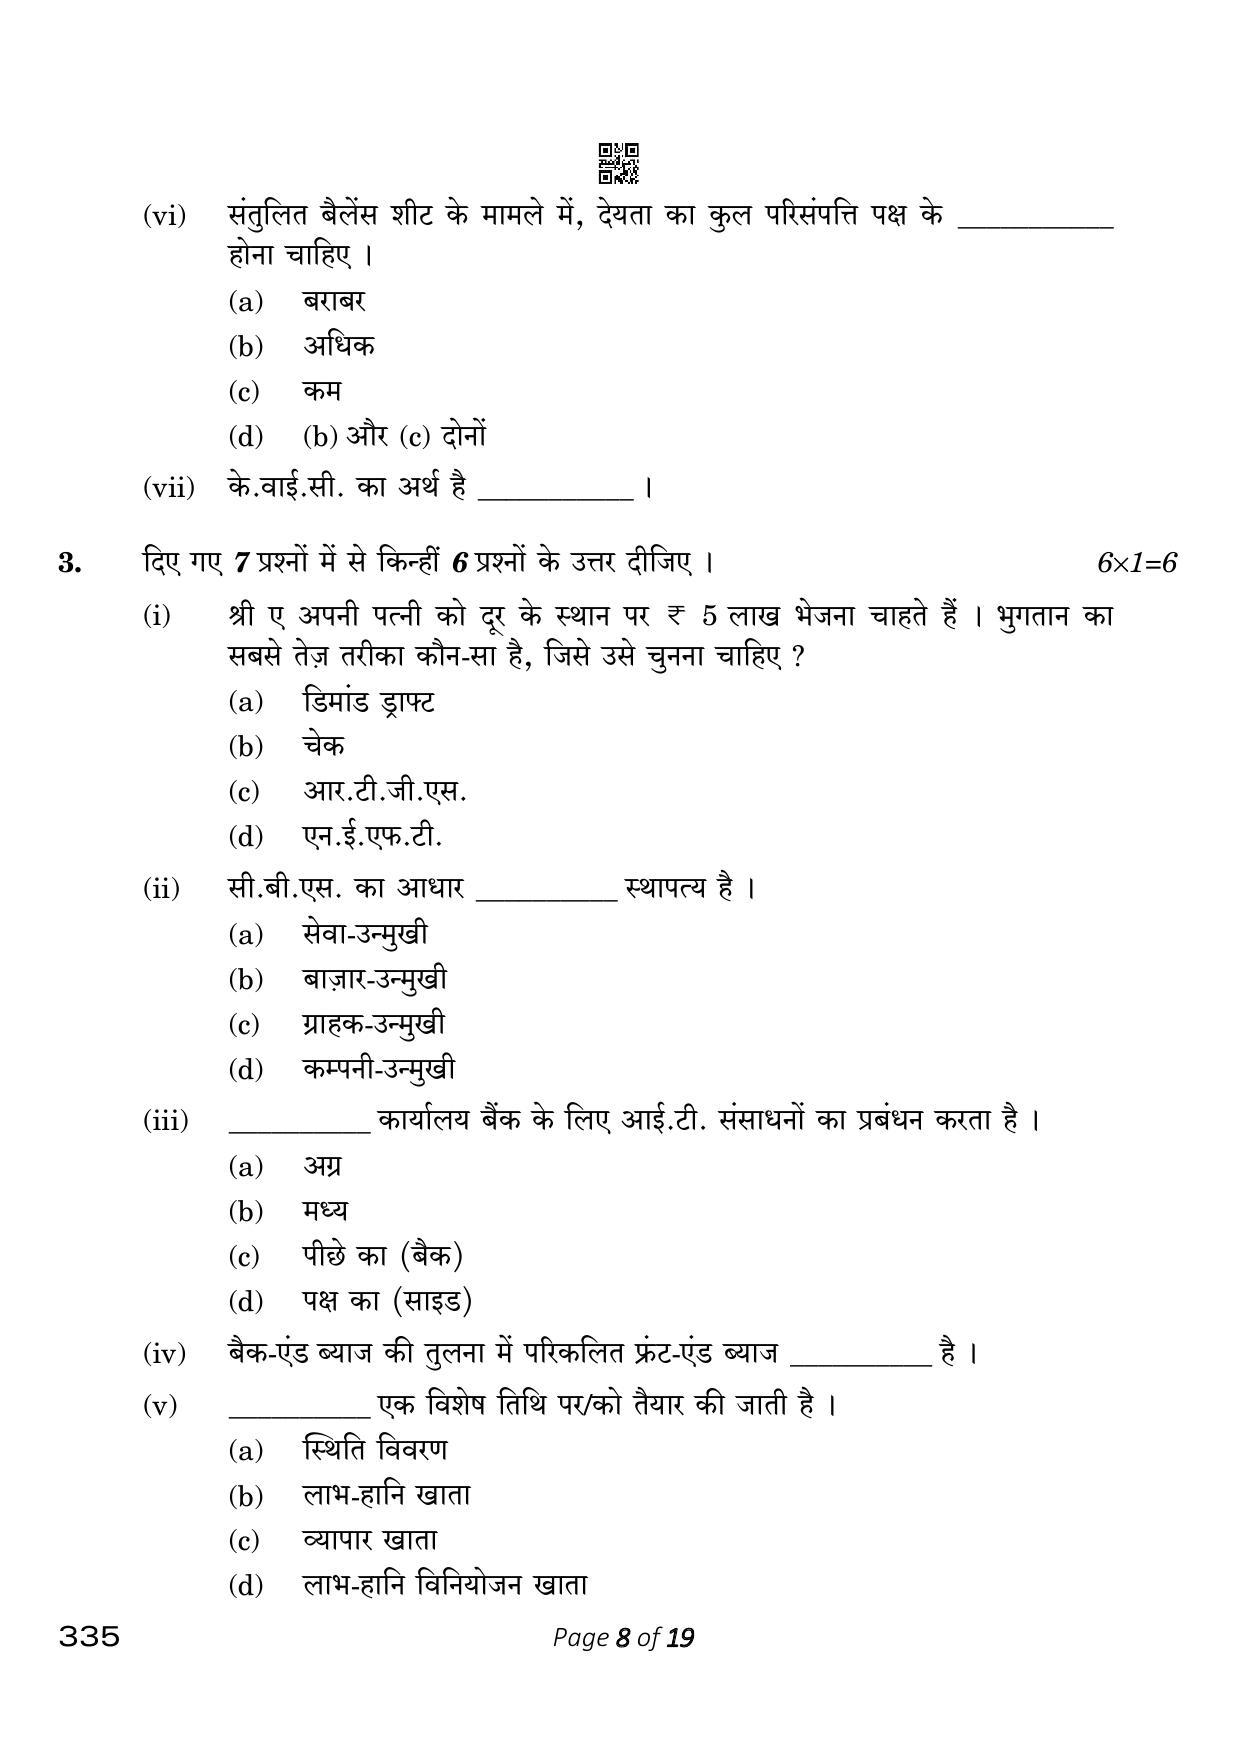 CBSE Class 12 335_Banking 2023 Question Paper - Page 8